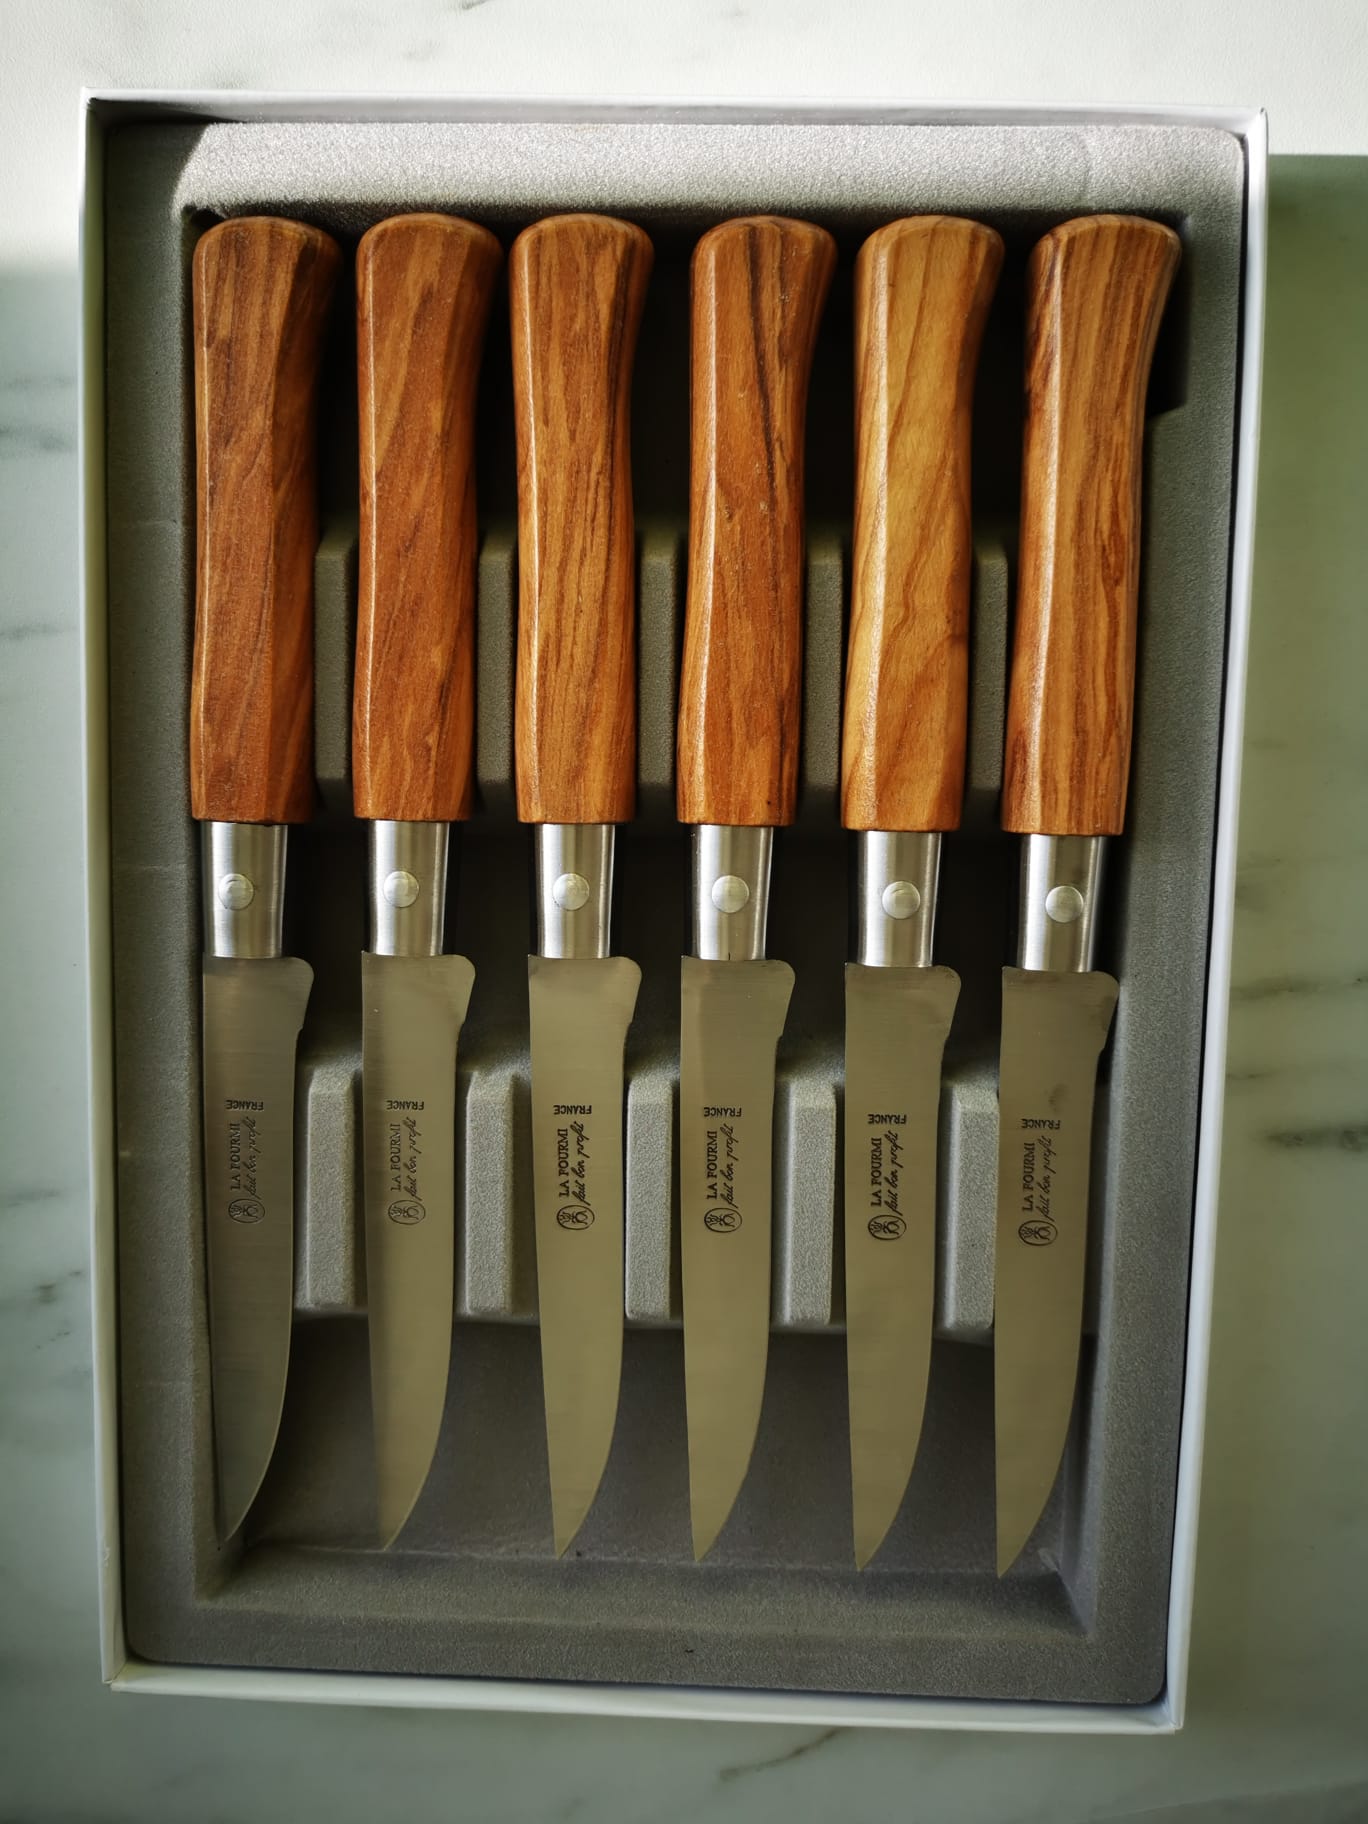 Box of 6 Country steak knives from La Fourmi olive wood handle Made in France/Box of 6 steak knives from the brand La Fourmi olive wood handle